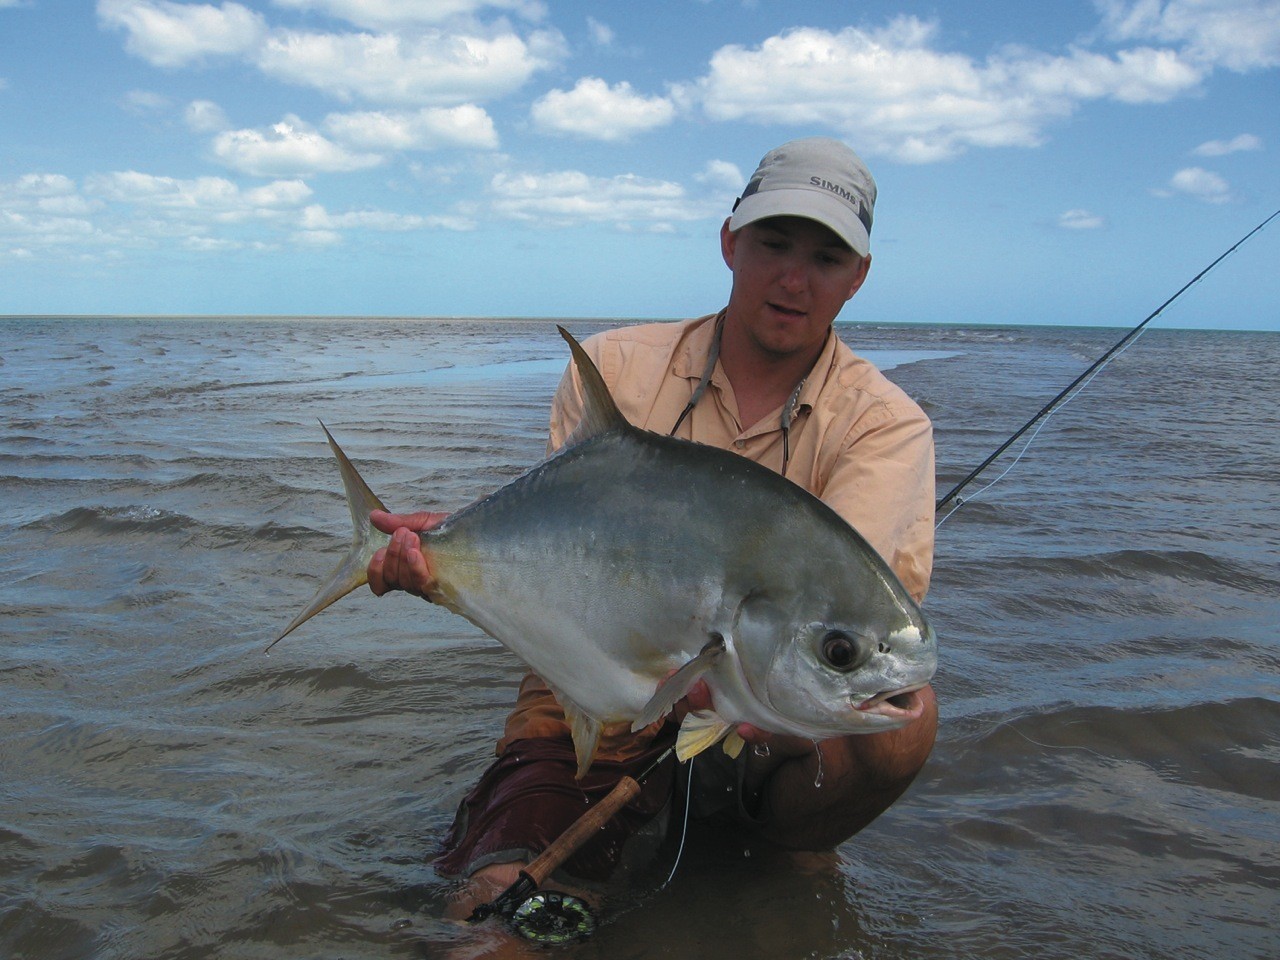 Cape York Australia Fishing - Fishabout Fishing Outfitters